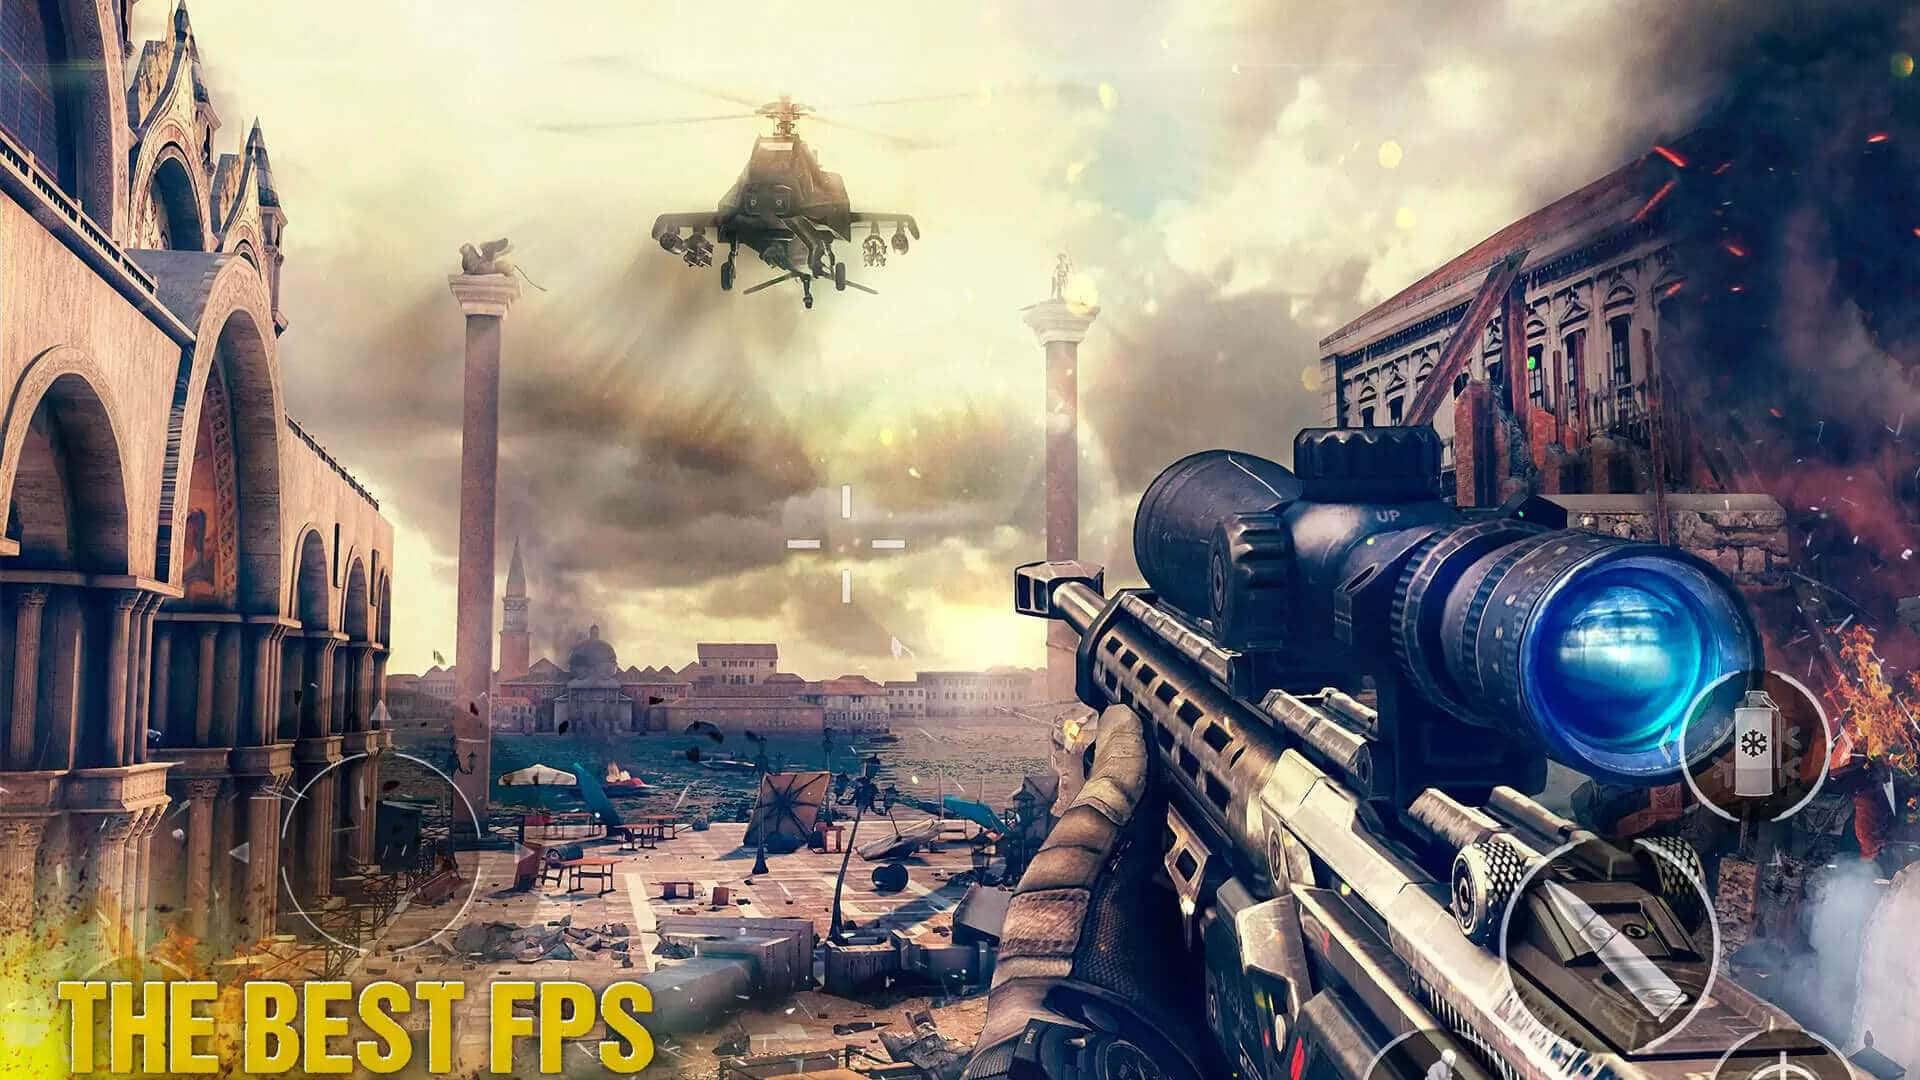 Intense First-Person Shooter Gaming Action Wallpaper